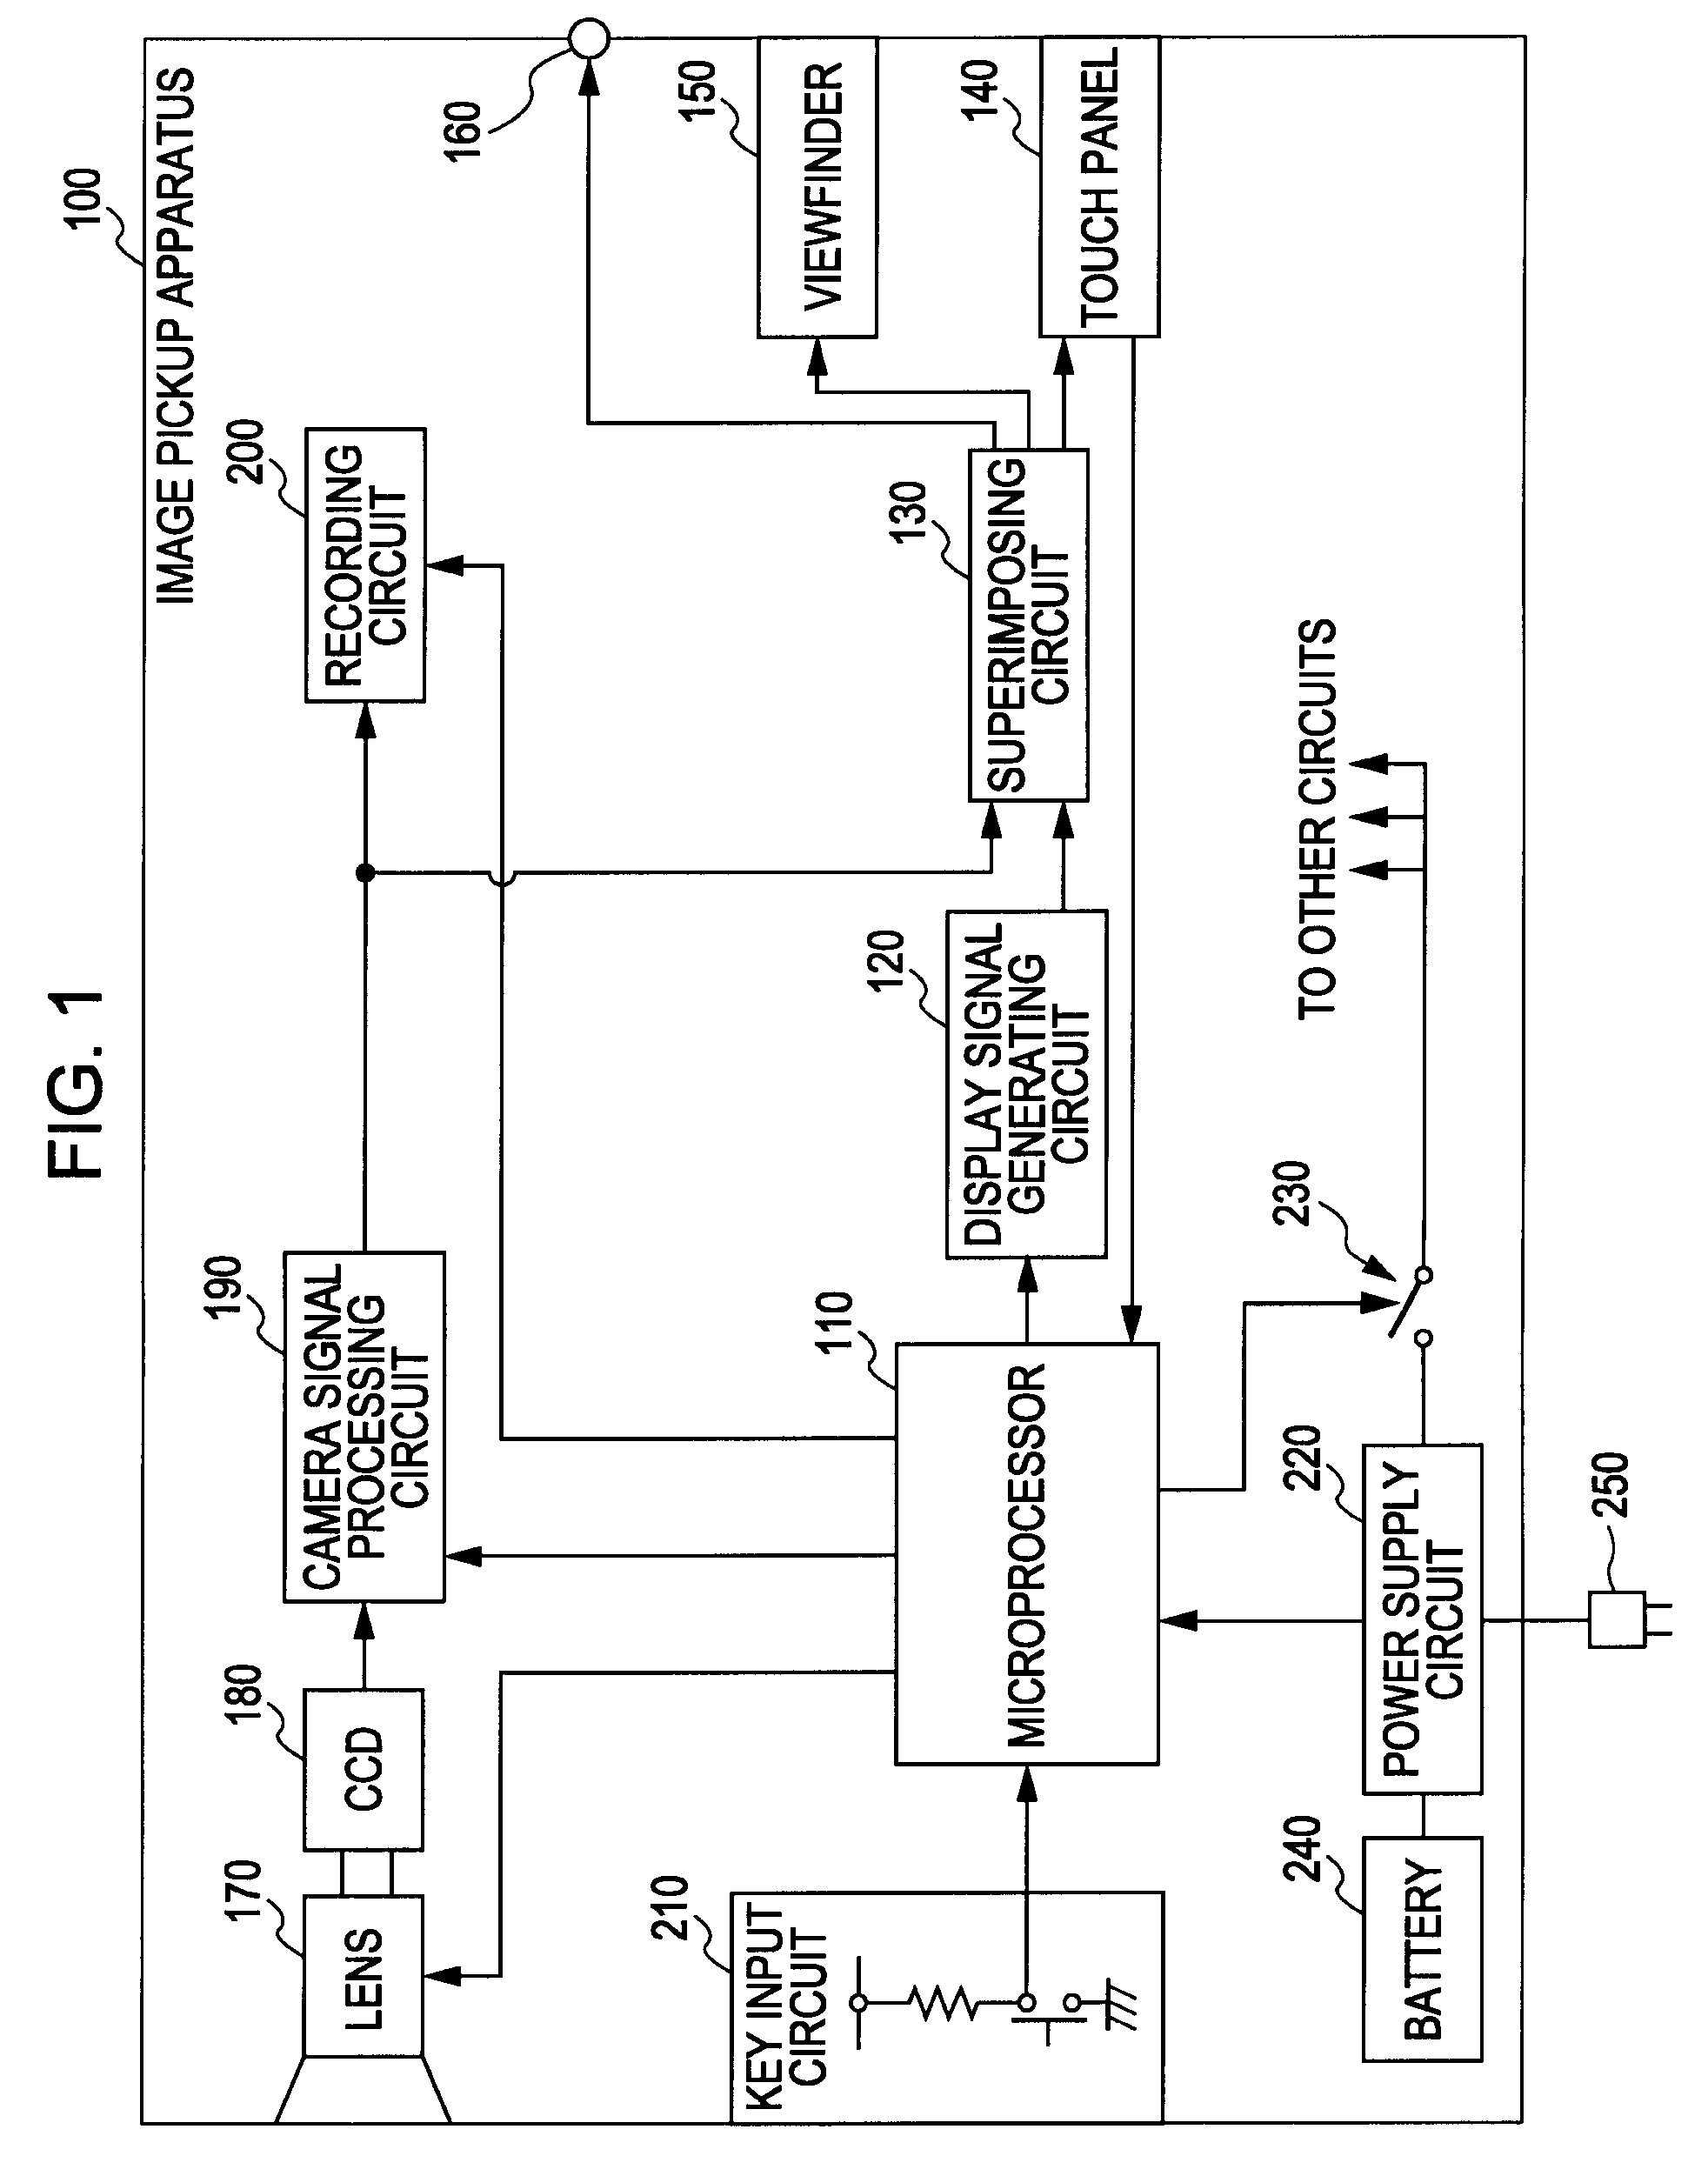 Image pickup apparatus, method for controlling display of image pickup apparatus, and computer program for executing method for controlling display of image pickup apparatus